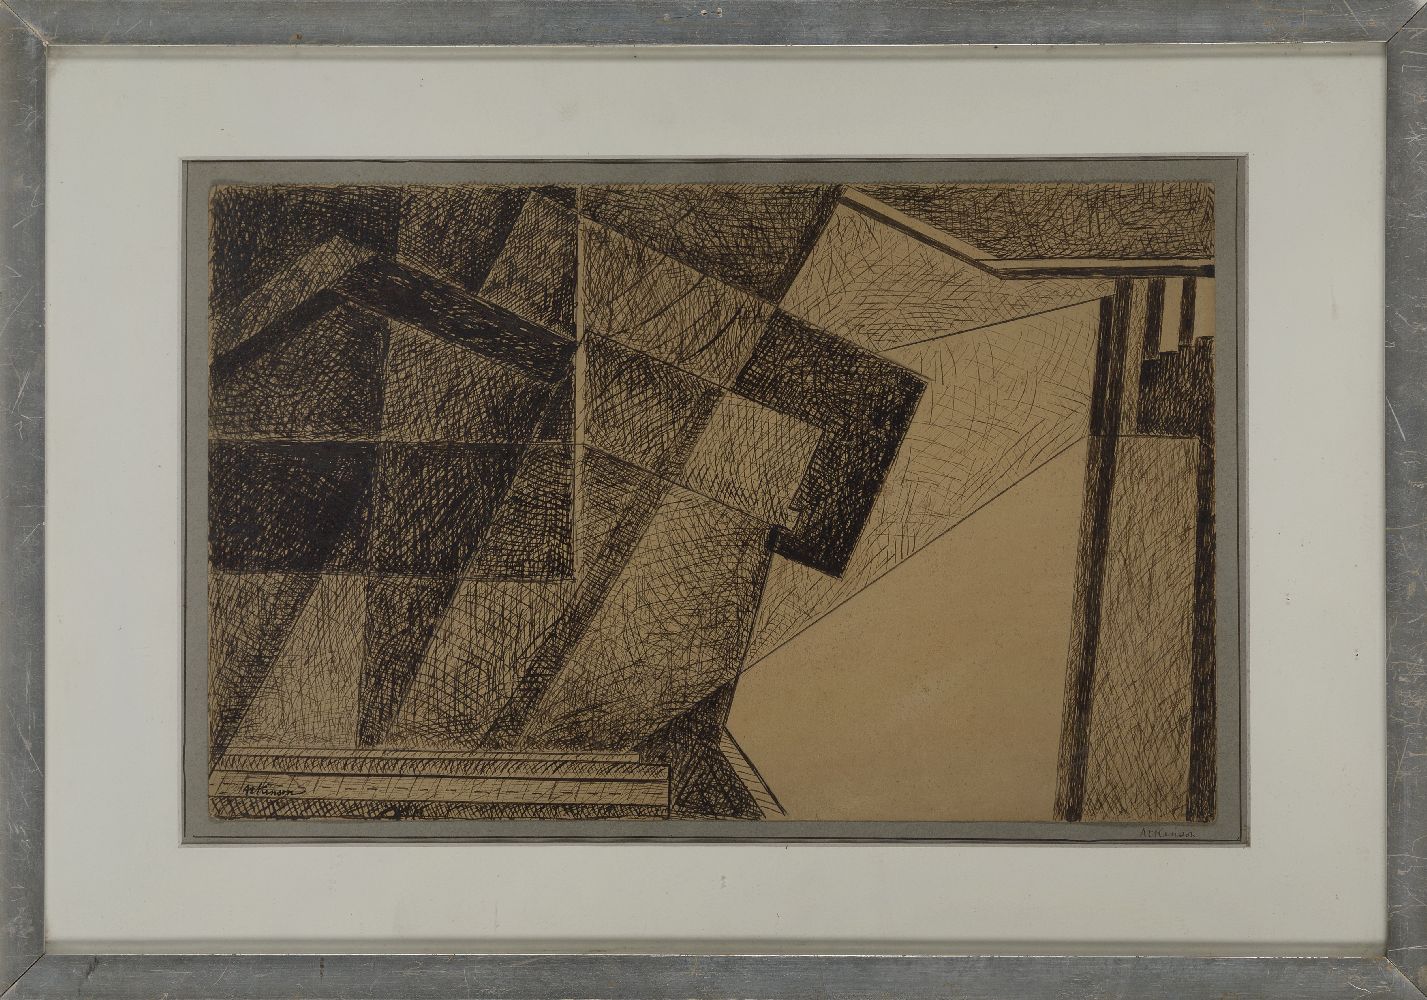 Lawrence Atkinson, British 1873-1931 - Abstract composition, c.1913-18; ink on paper - Image 2 of 3